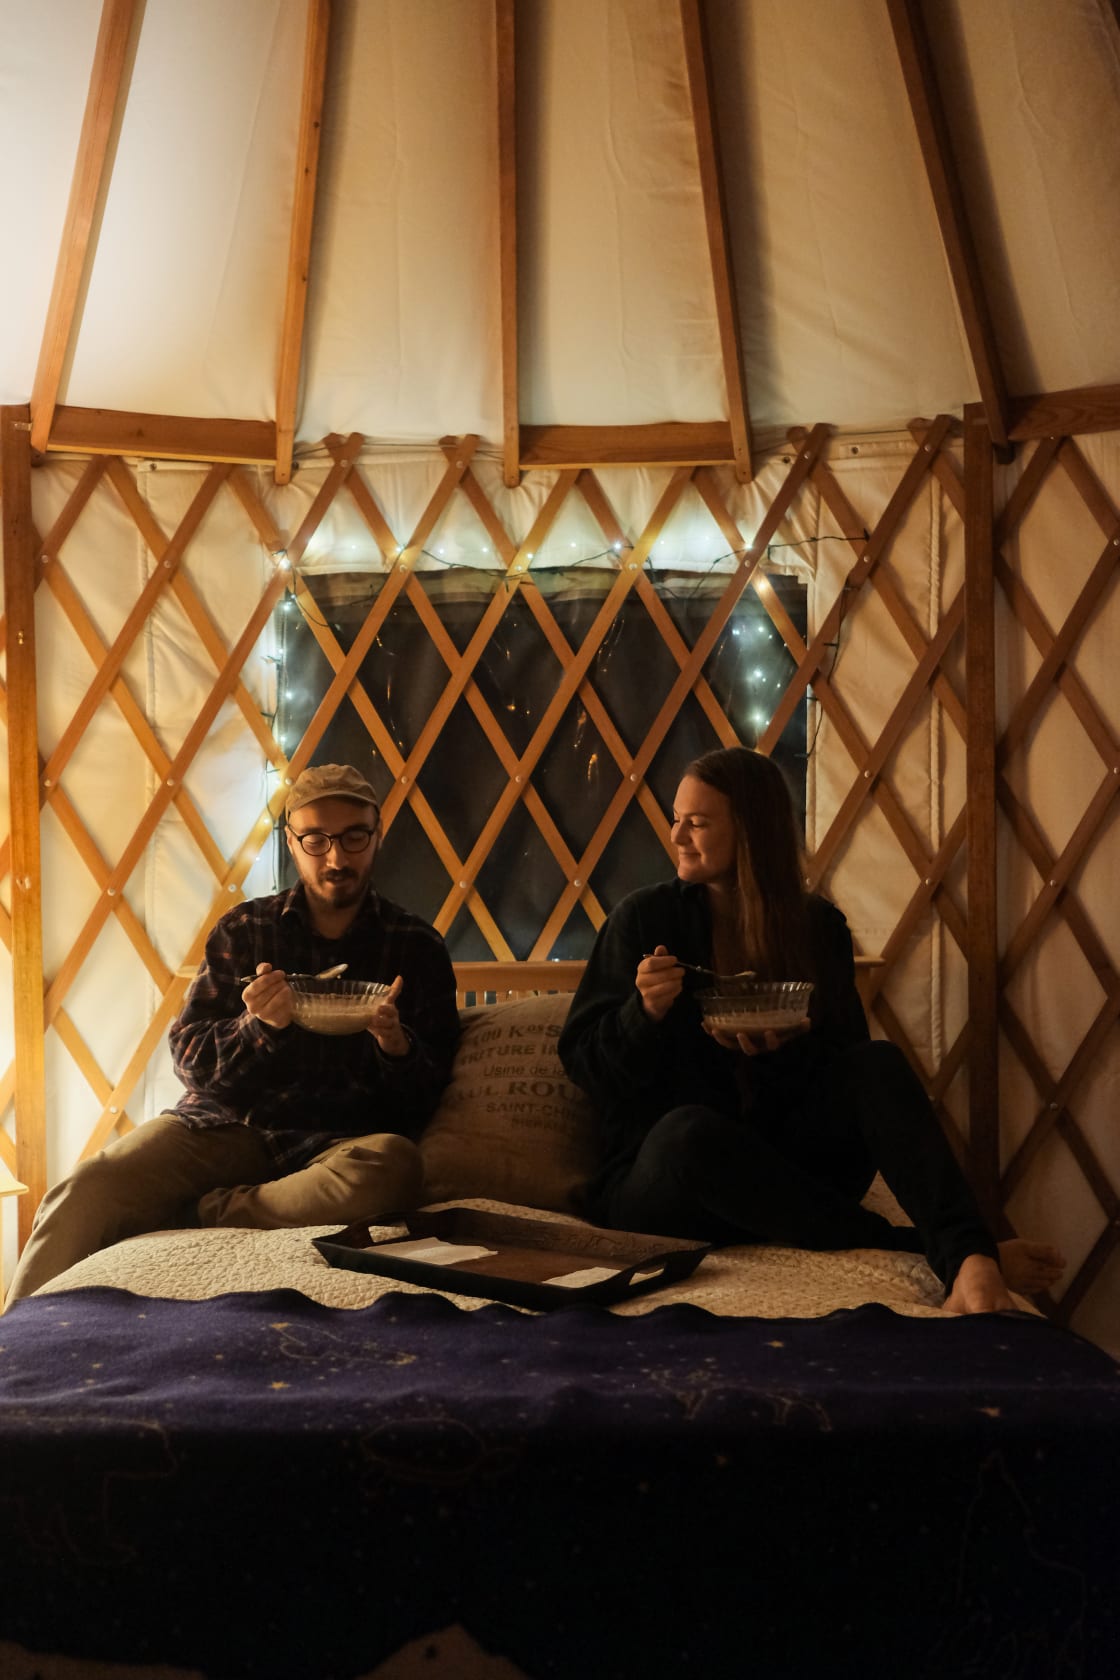 Sharing stories over dinner in the yurt. 